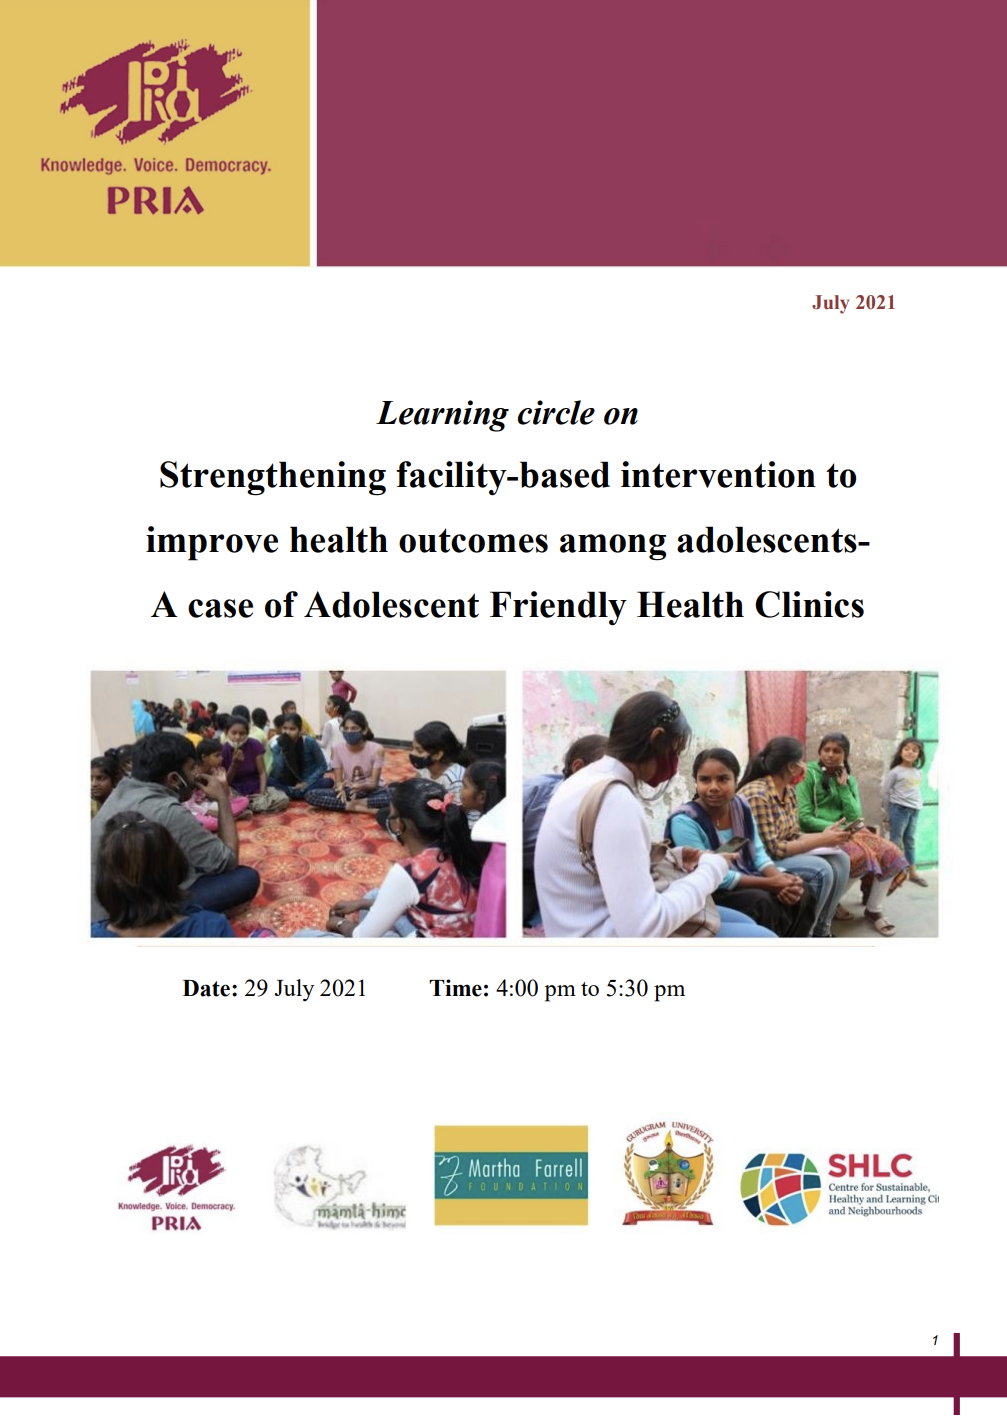 Learning Circle on strengthening facility-based intervention to improve health outcomes among adolescents - SHLC Learning Circle